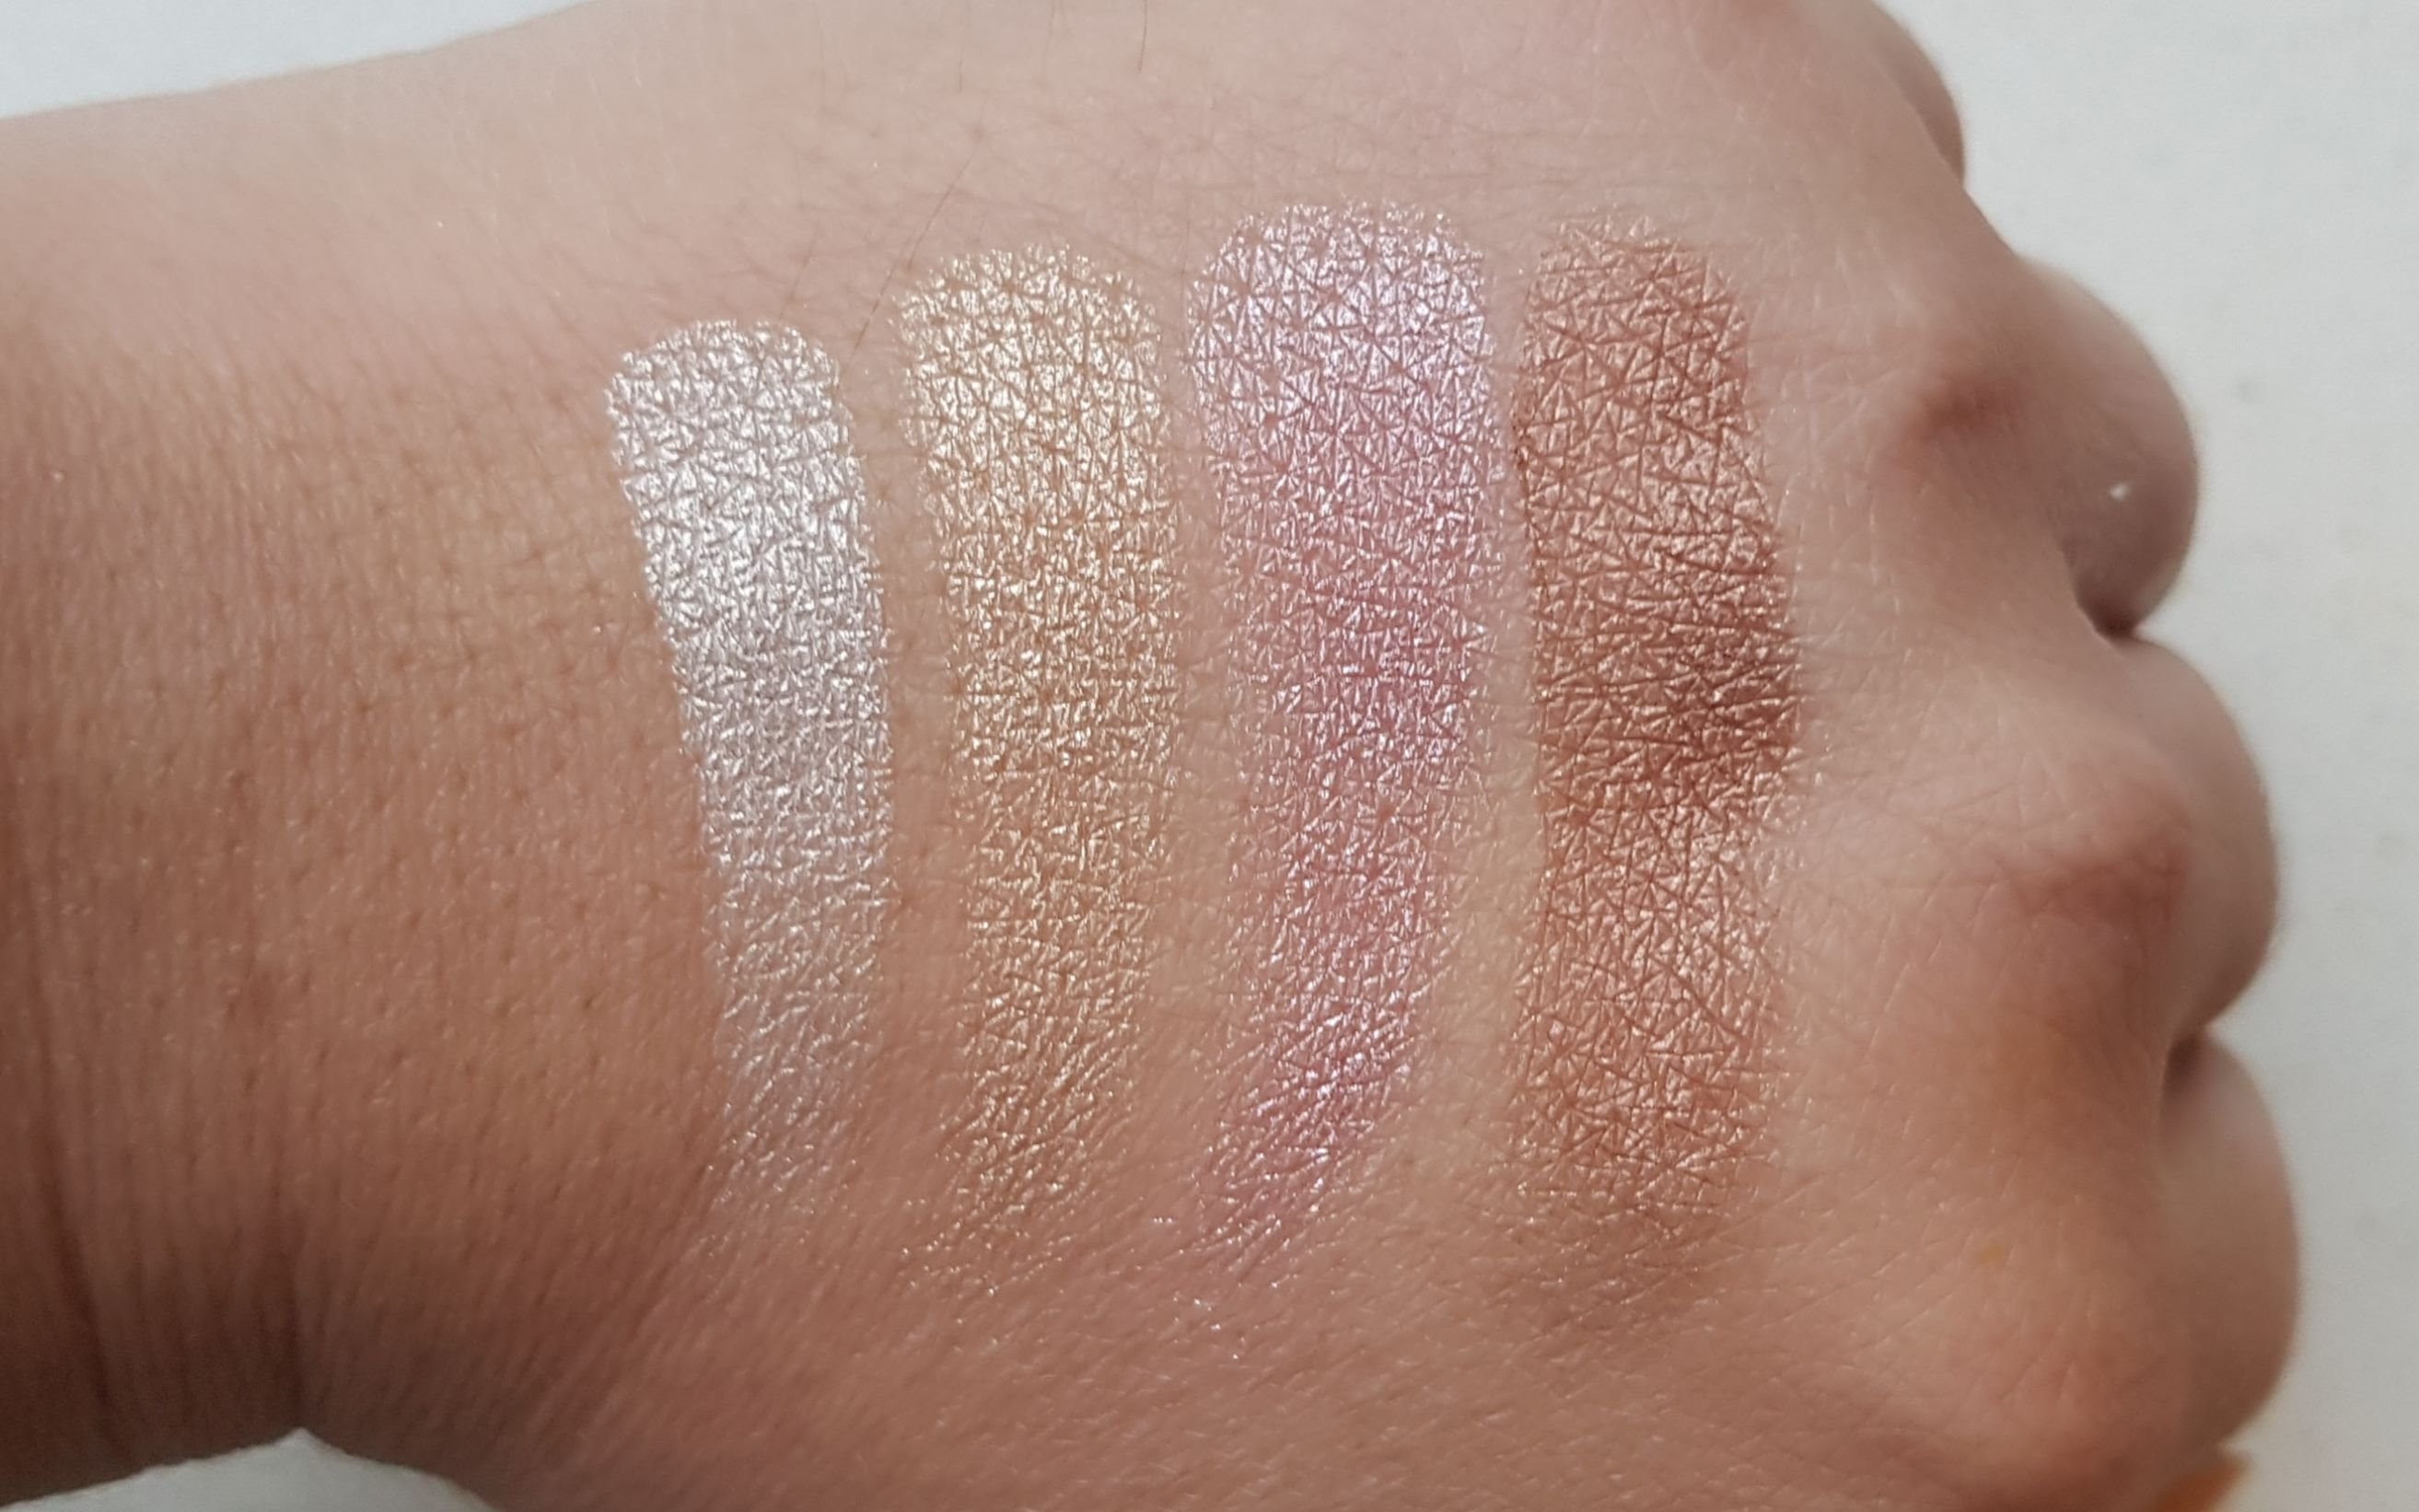 dior backstage glow palette review